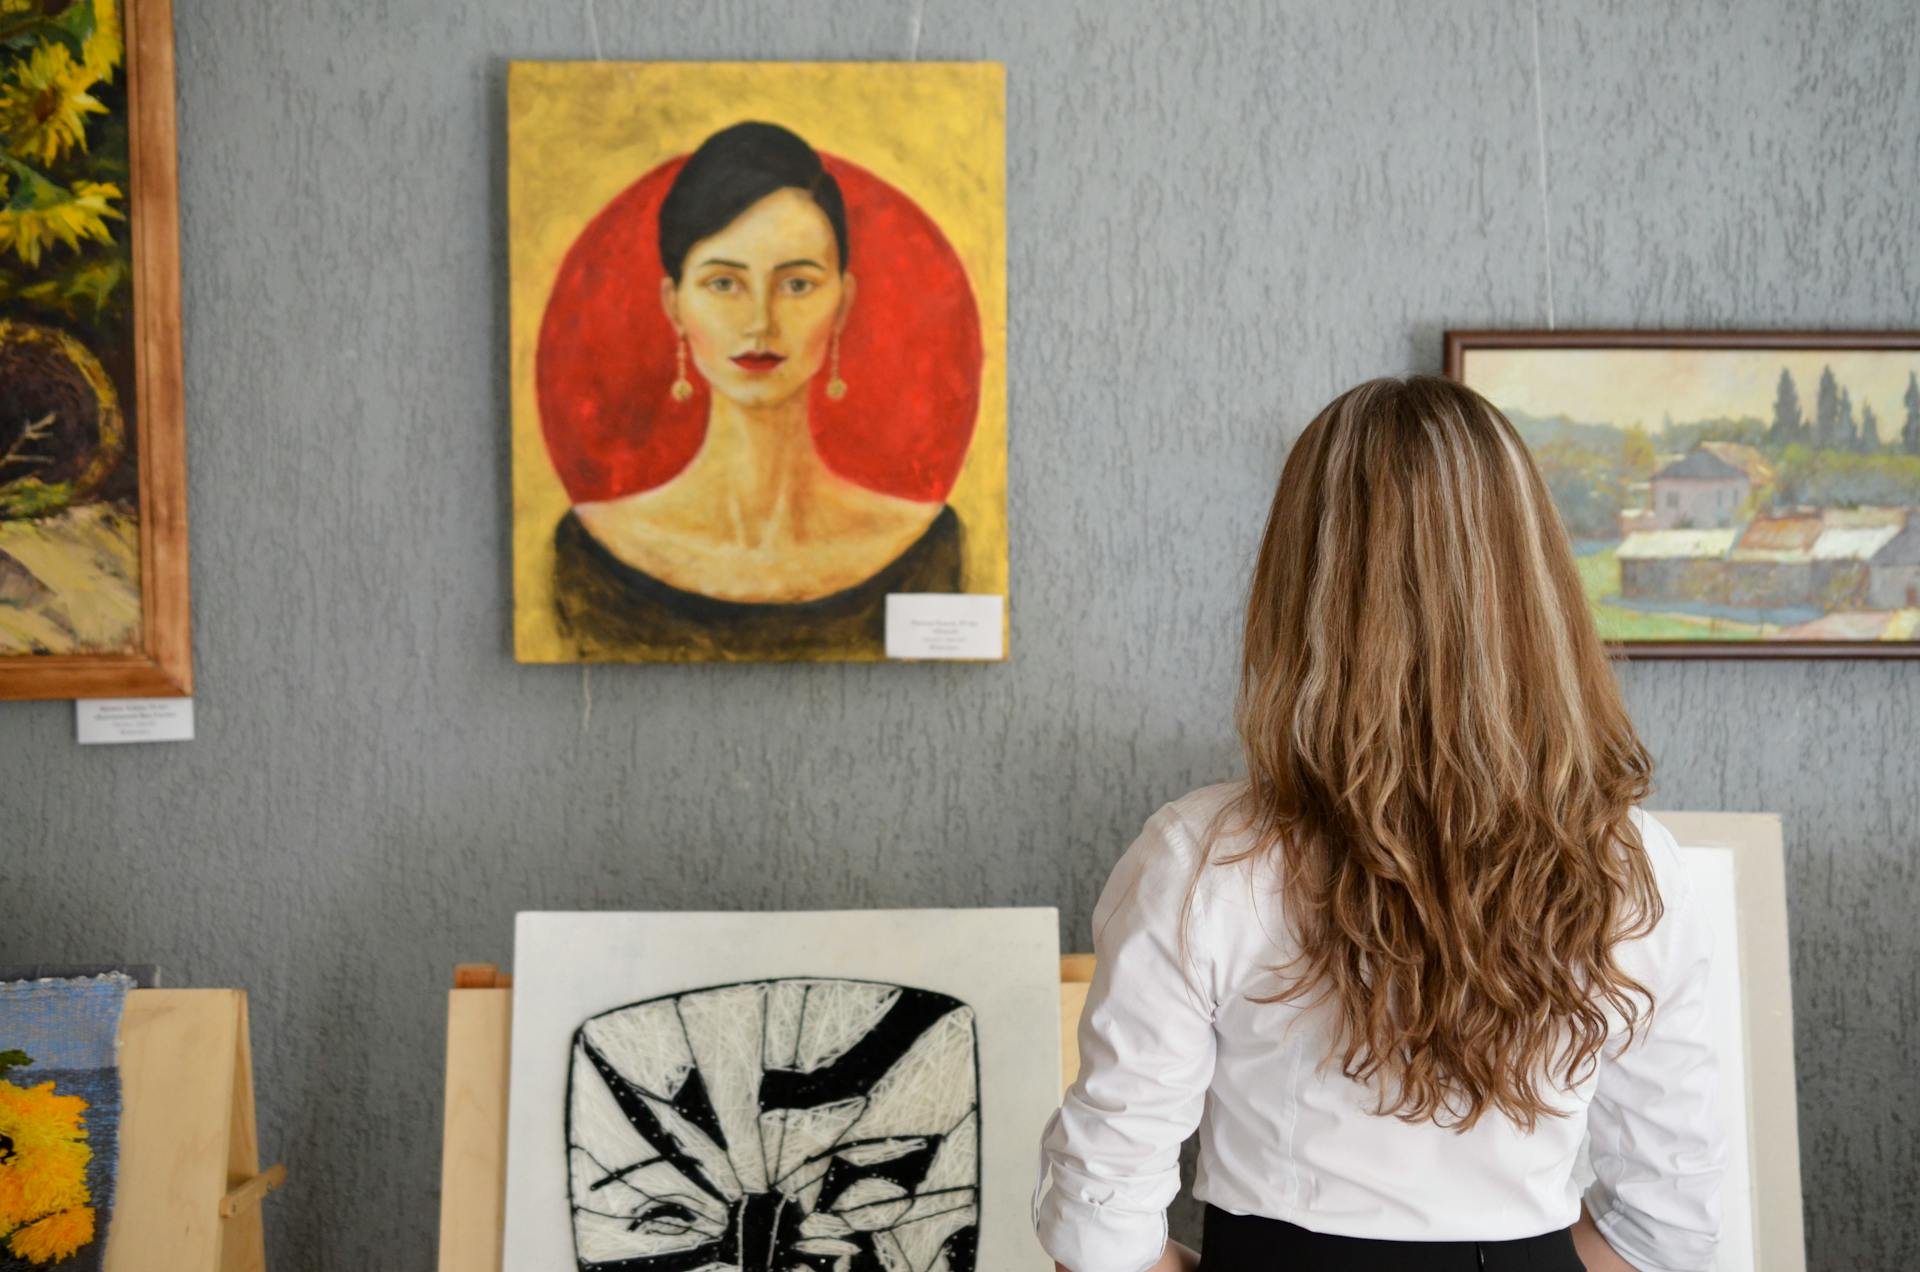 A young woman looking at paintings displayed on a wall | Source: Pexels